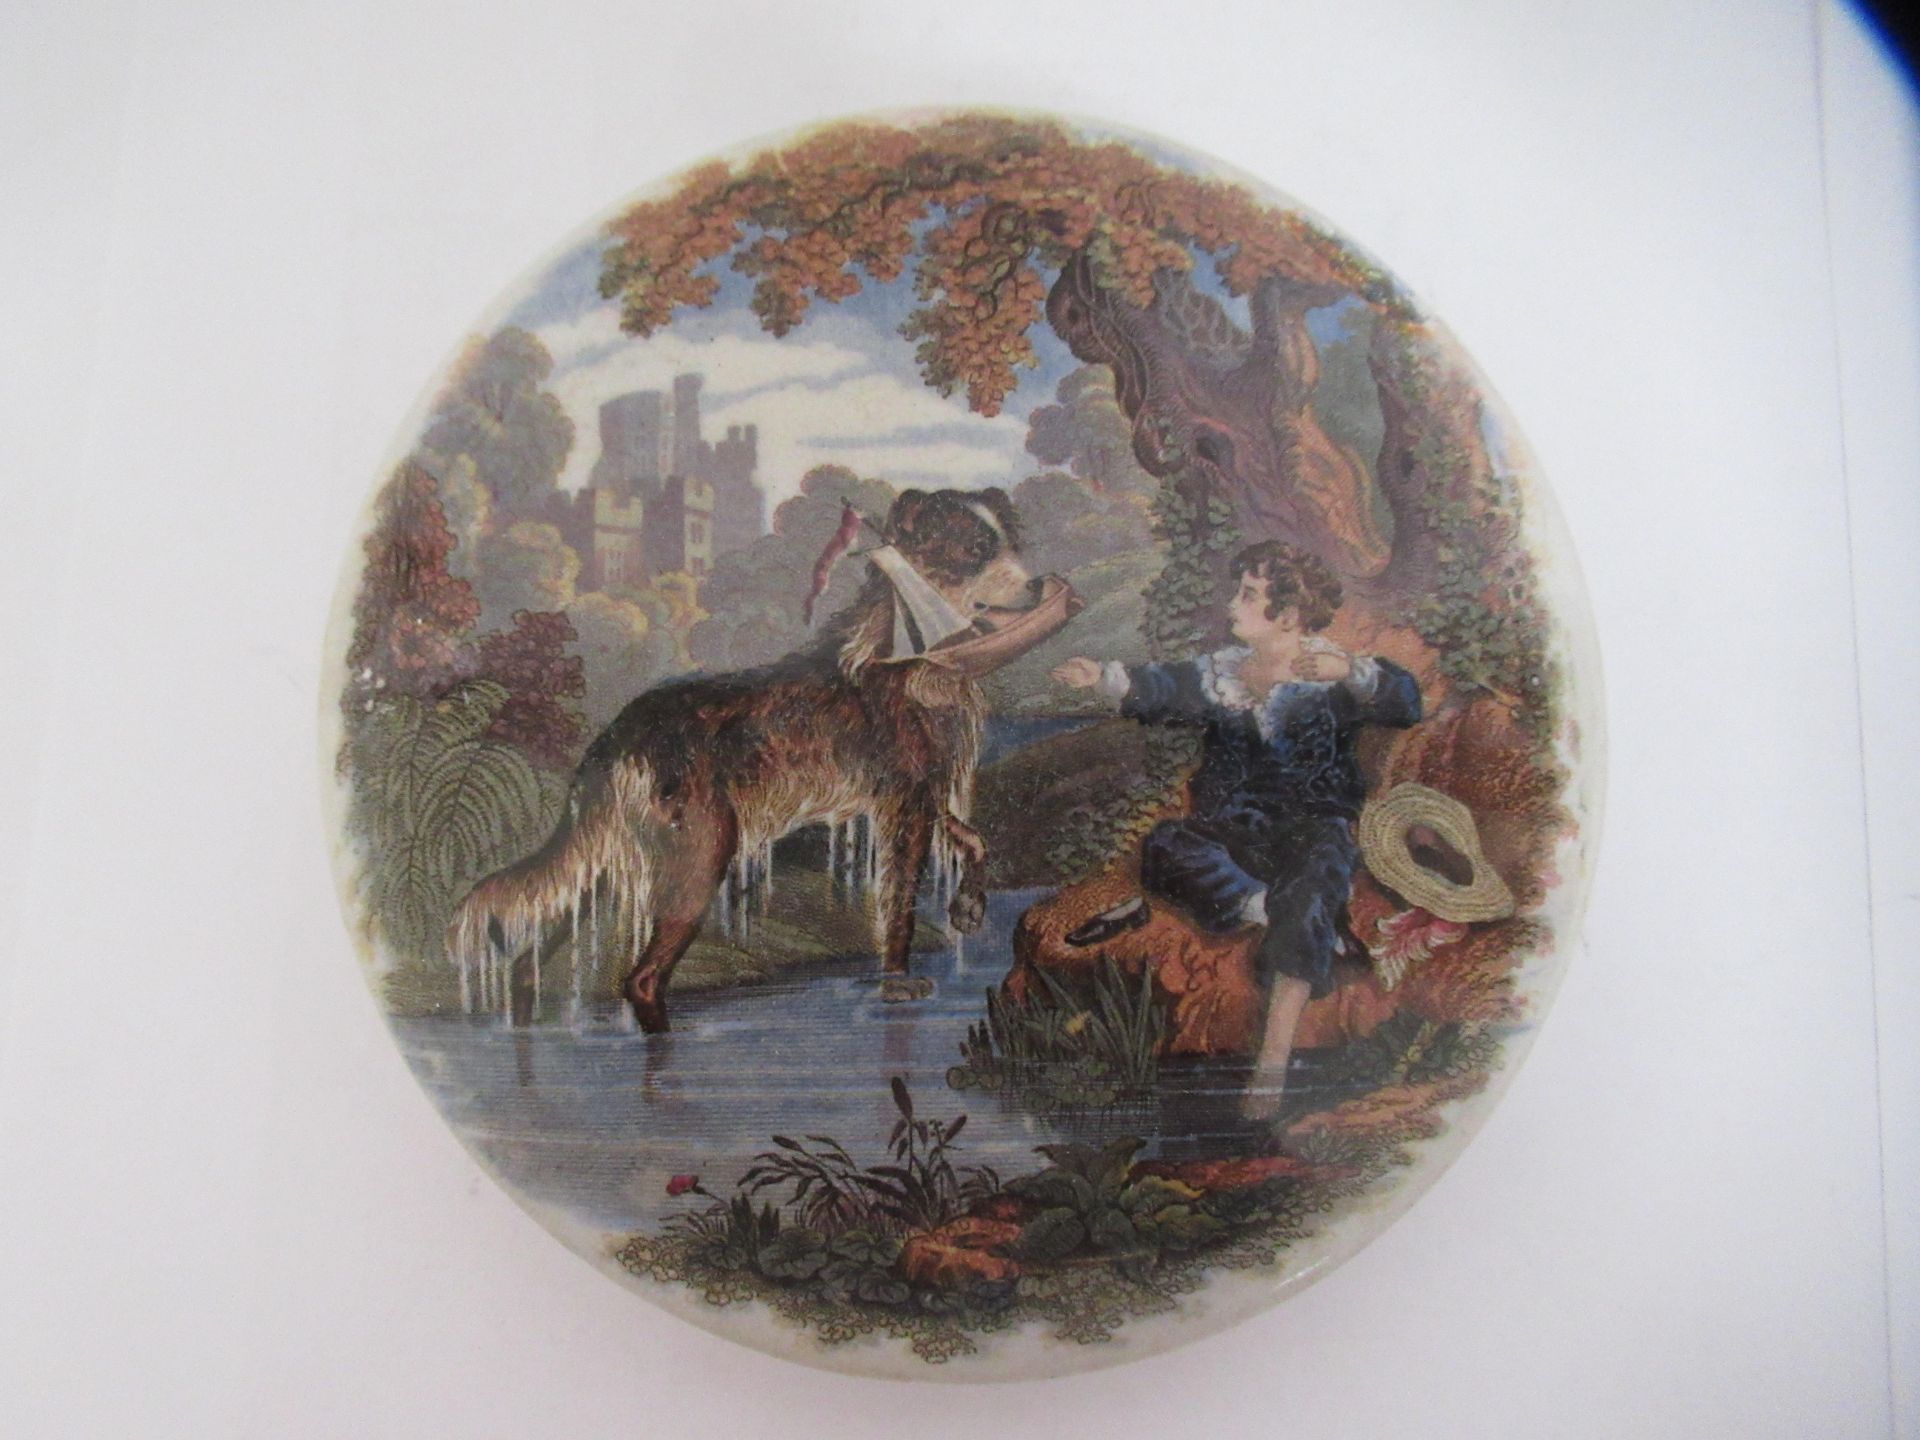 6x Prattware ceramic lids including 'Landing the Fare- Pegwell Bay', 'I See You My Boy', 'Dr Johnson - Image 20 of 25